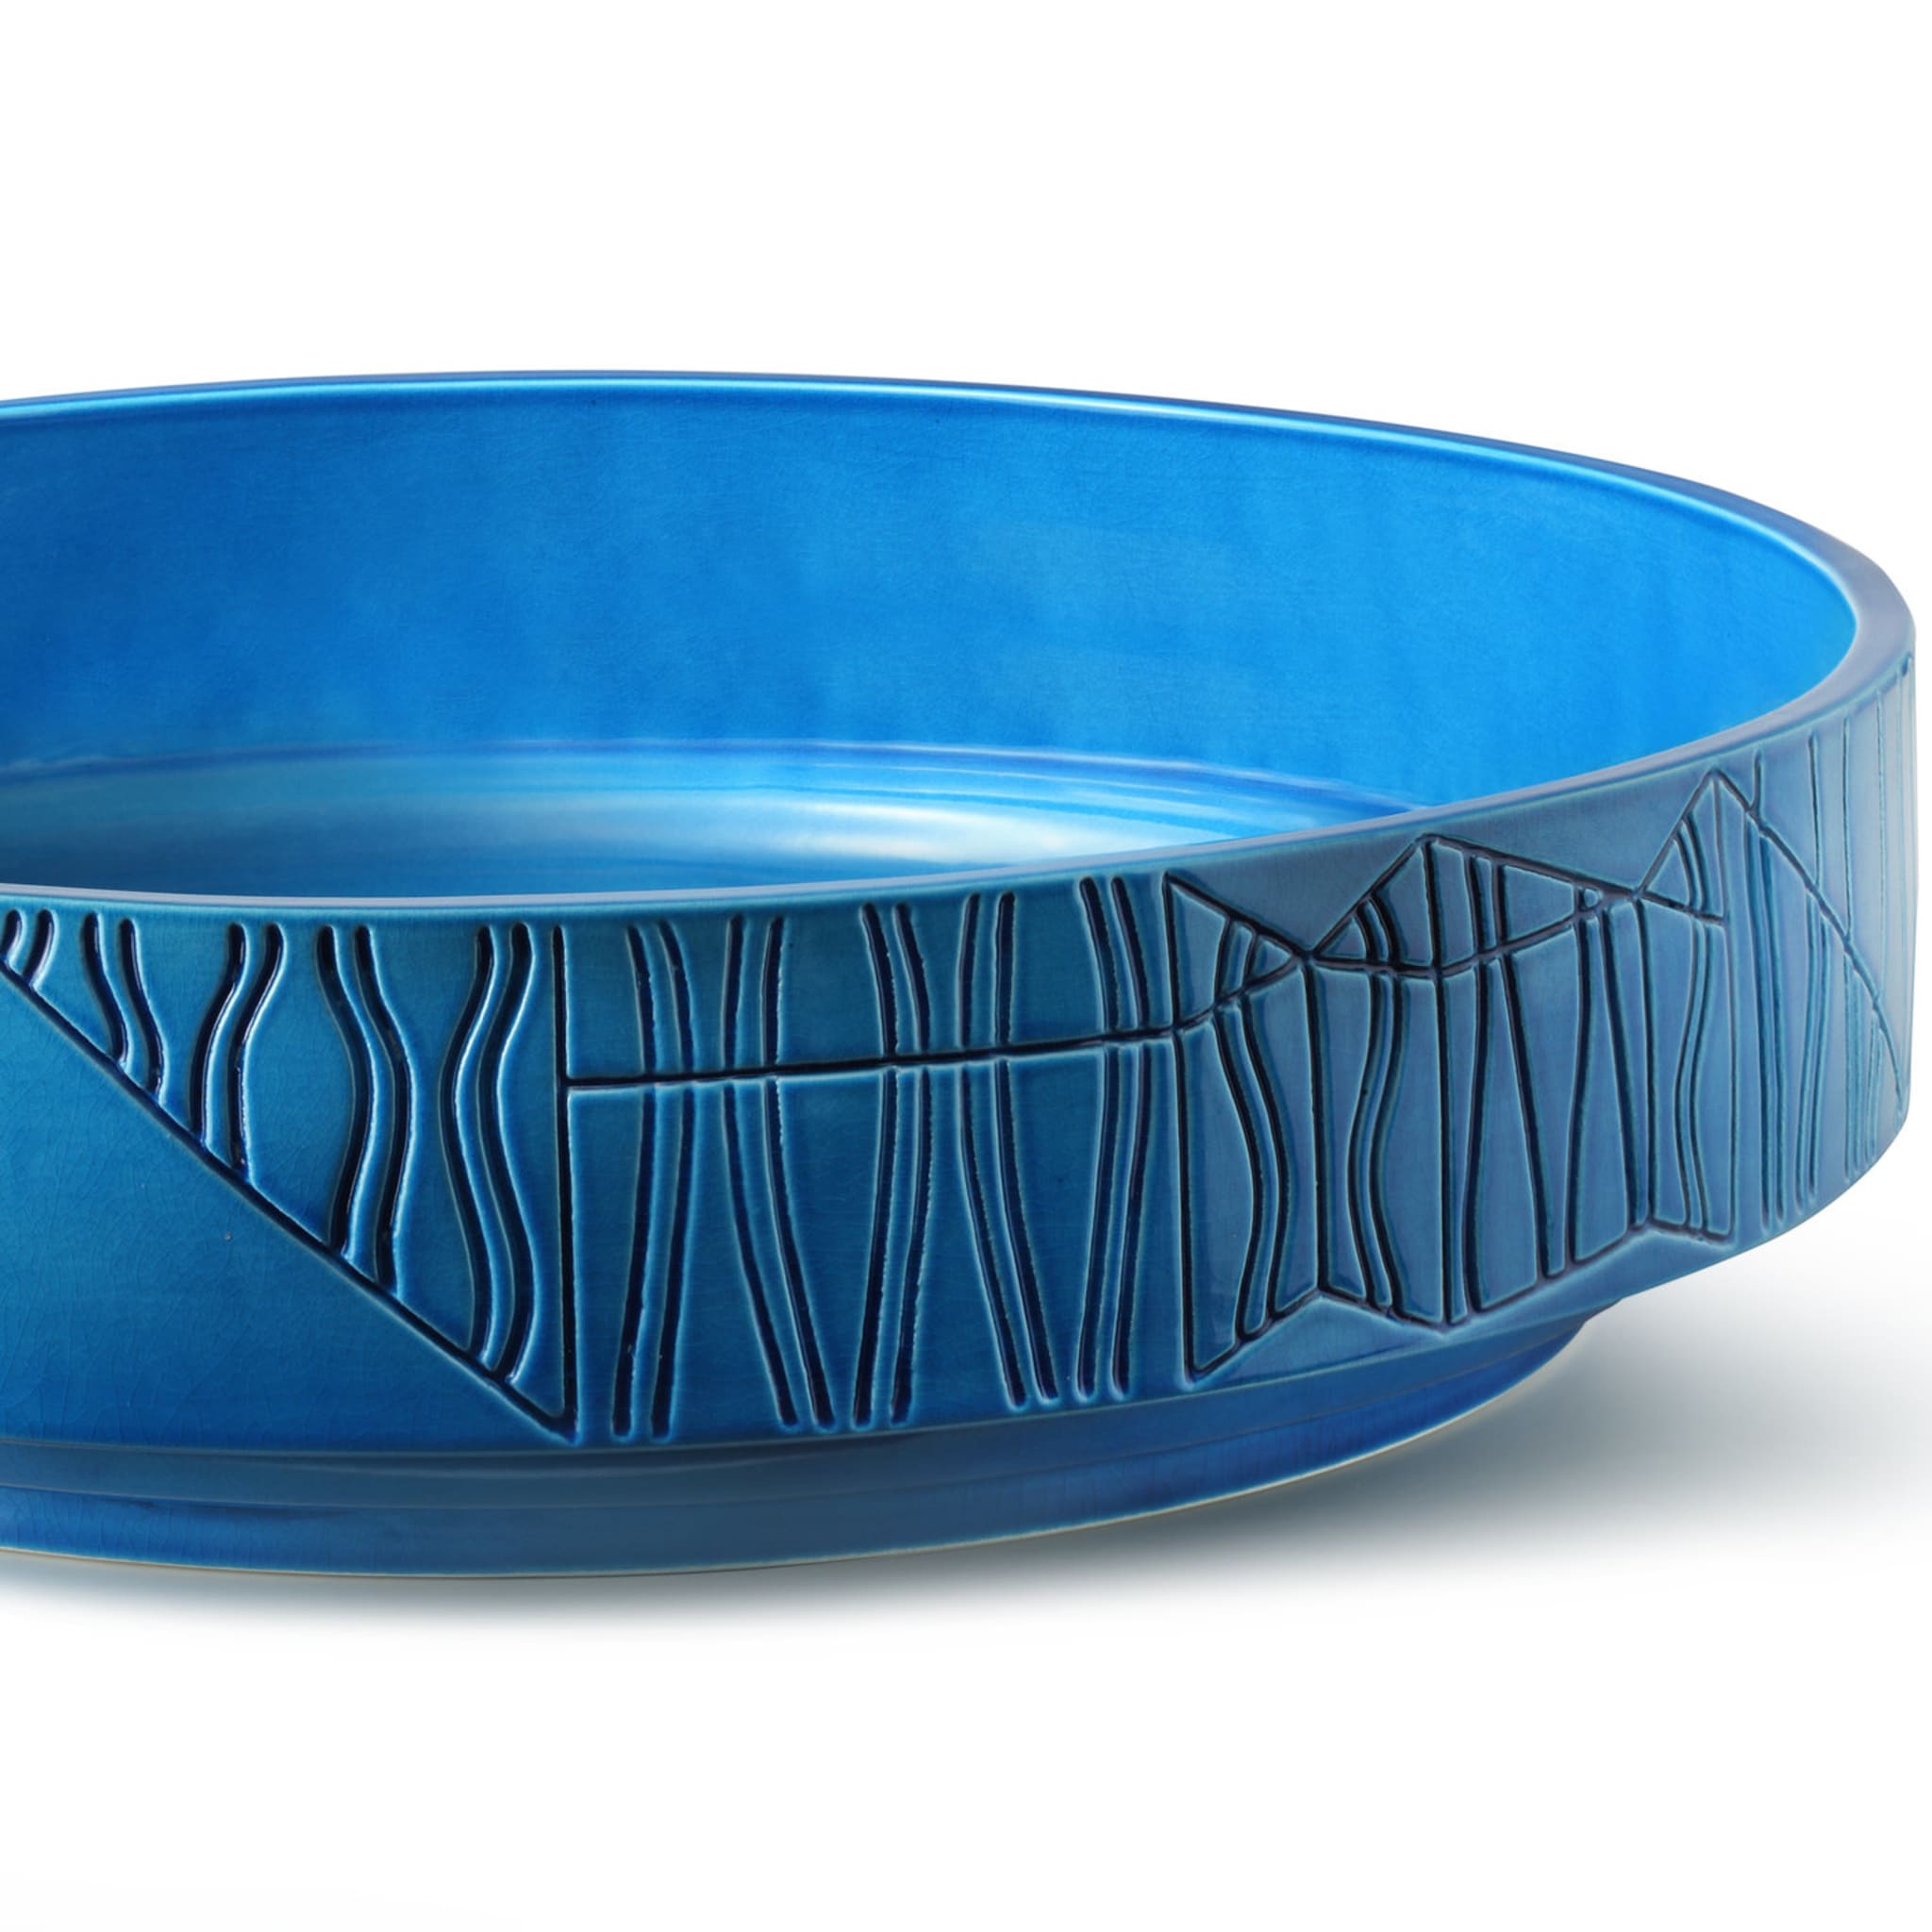 Blue Bowl by Bethan Laura Wood - Alternative view 2